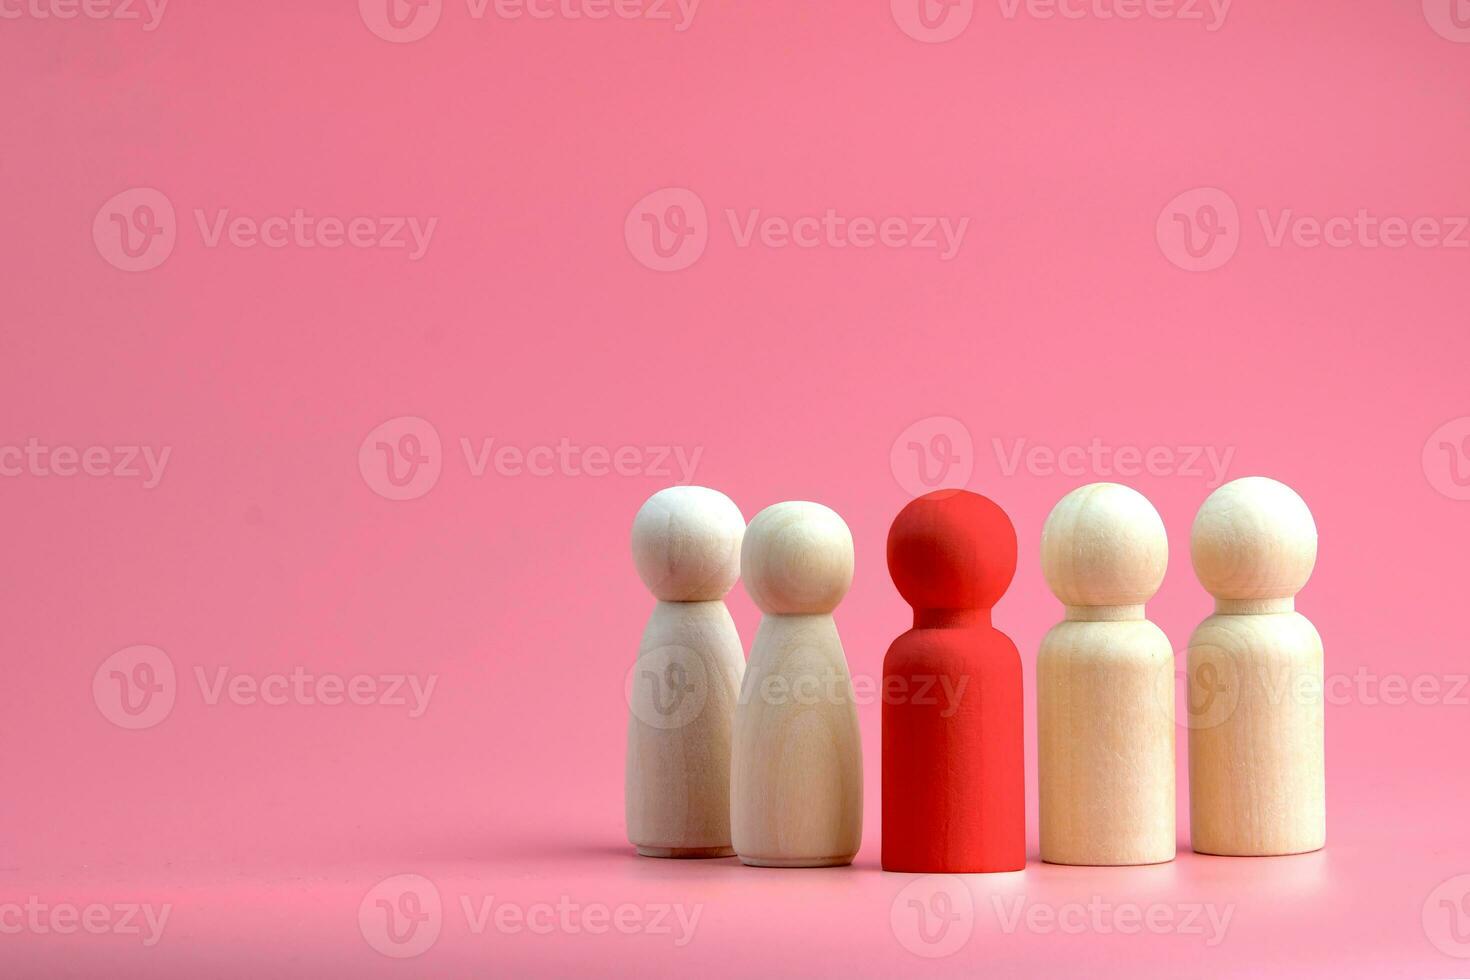 Red wooden doll Among the normal wooden dolls on a pink background. Concept of individuality, assertiveness, Leadership, and teamwork photo